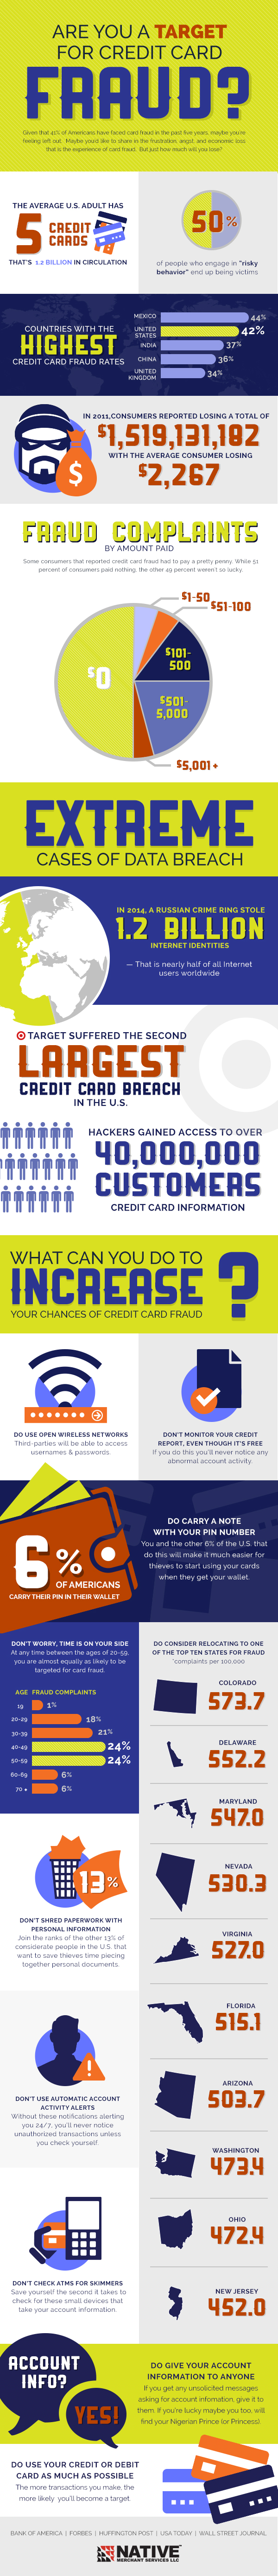 Credit Card Fraud Infographic